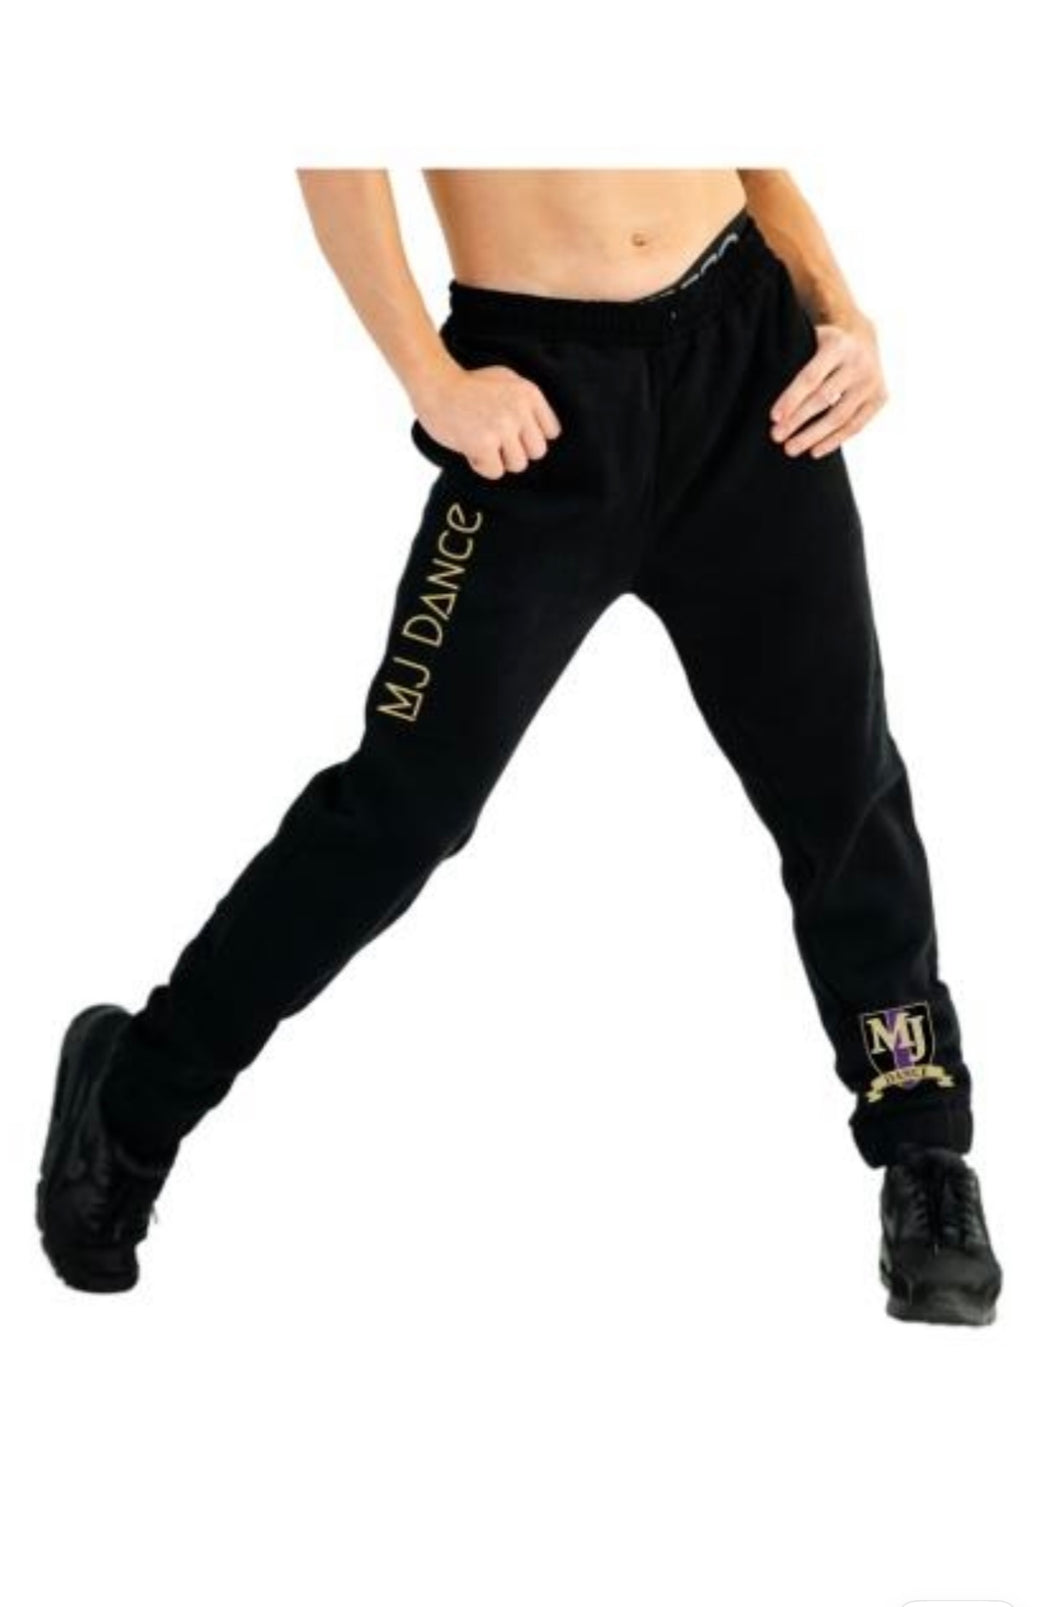 Cosi G MJ Trackies Childrens size